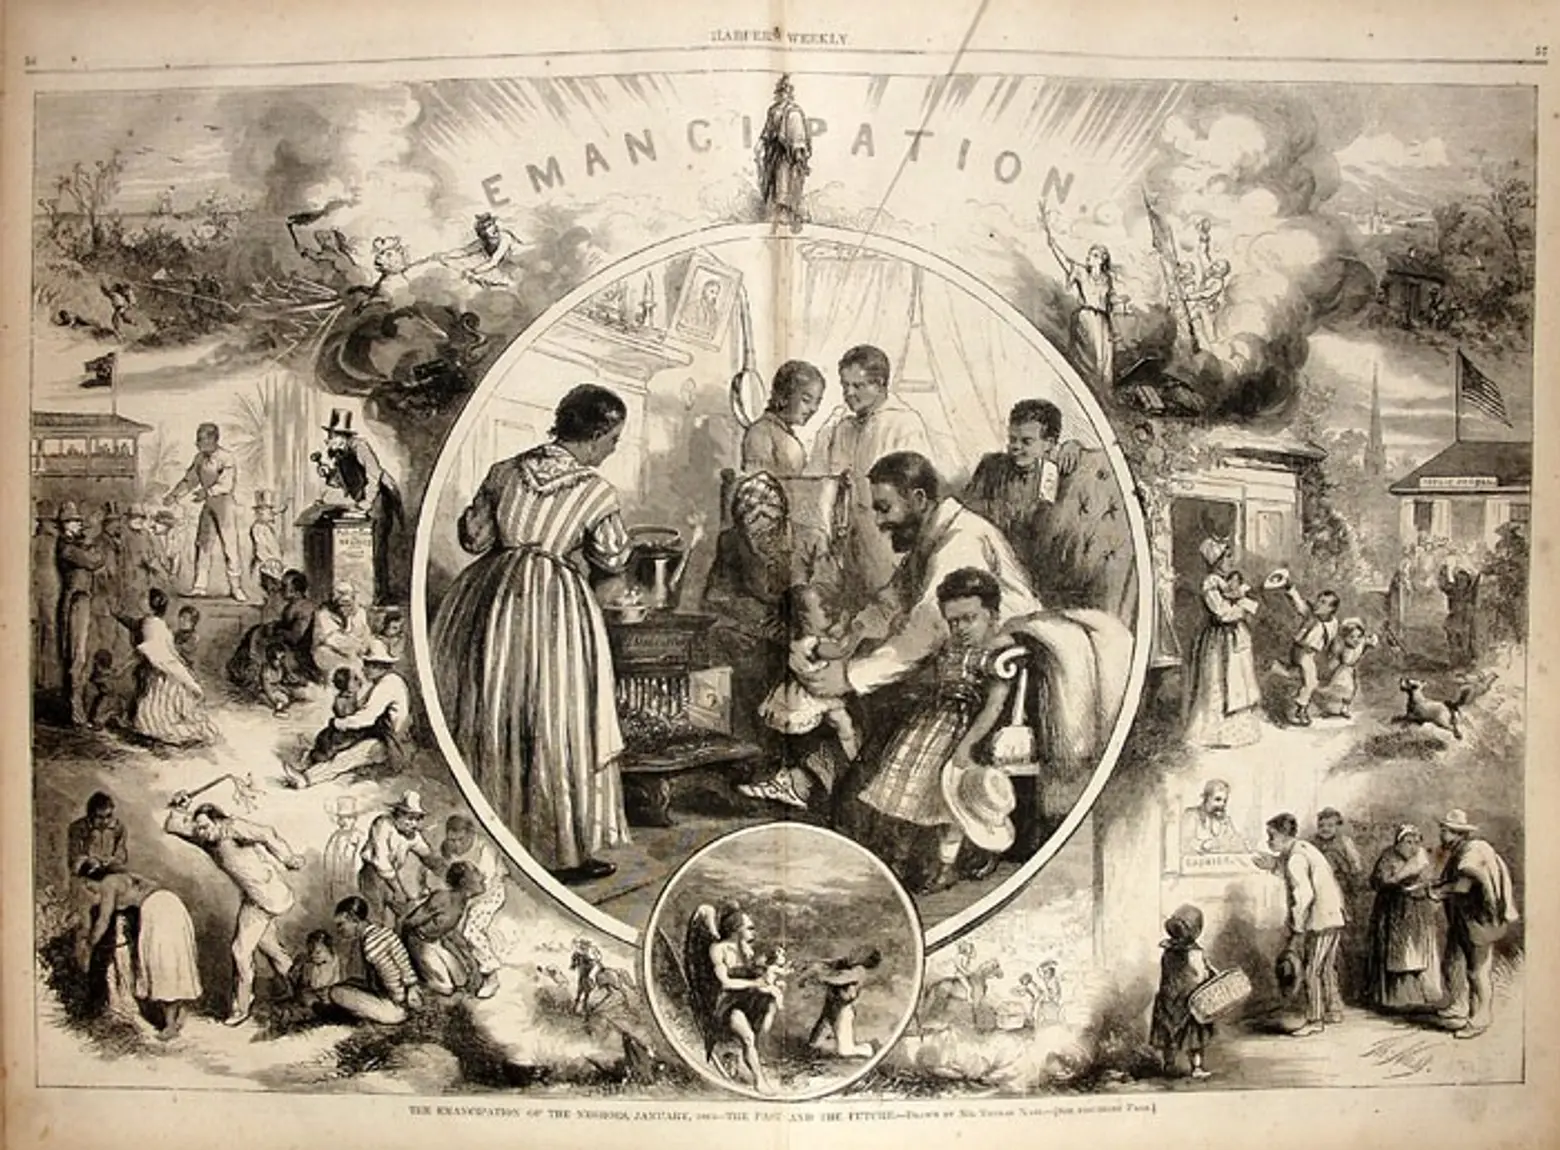 Presidential election of 1864. Political drawing by Thomas Nash